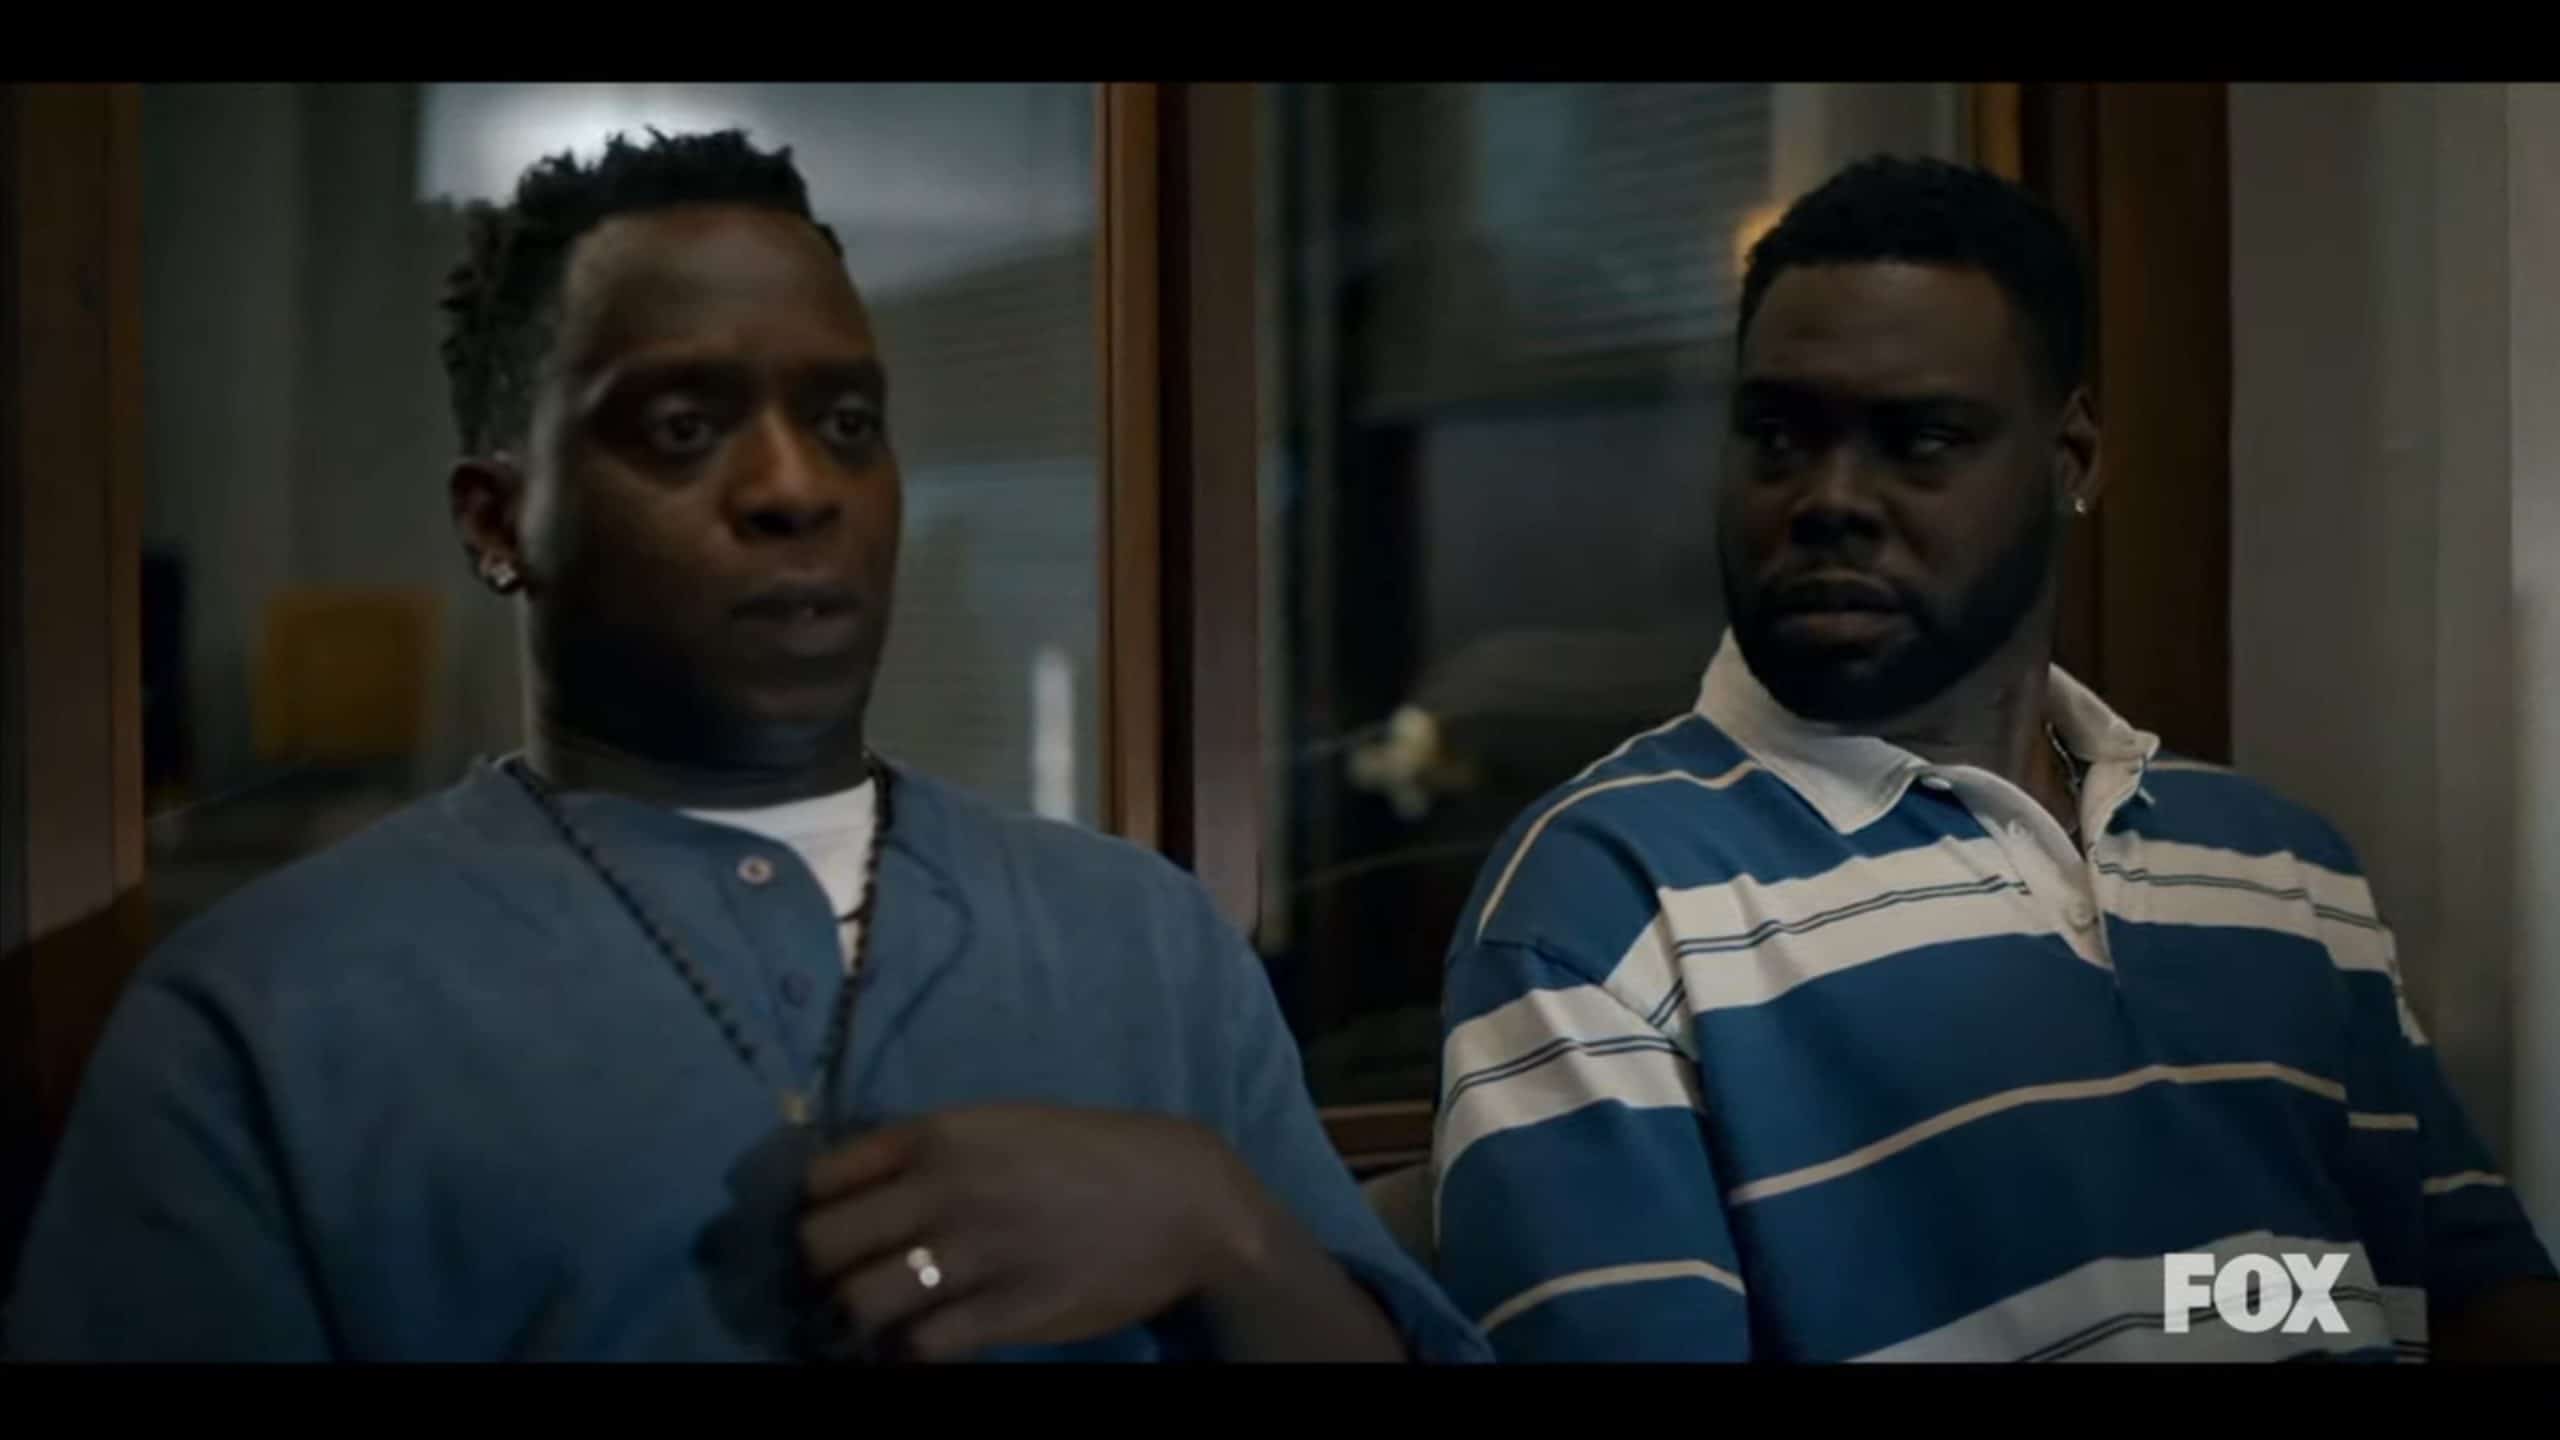 Kobna Holdbrook-Smith as David and Donald Paul as Lamar waiting to speak with the detective